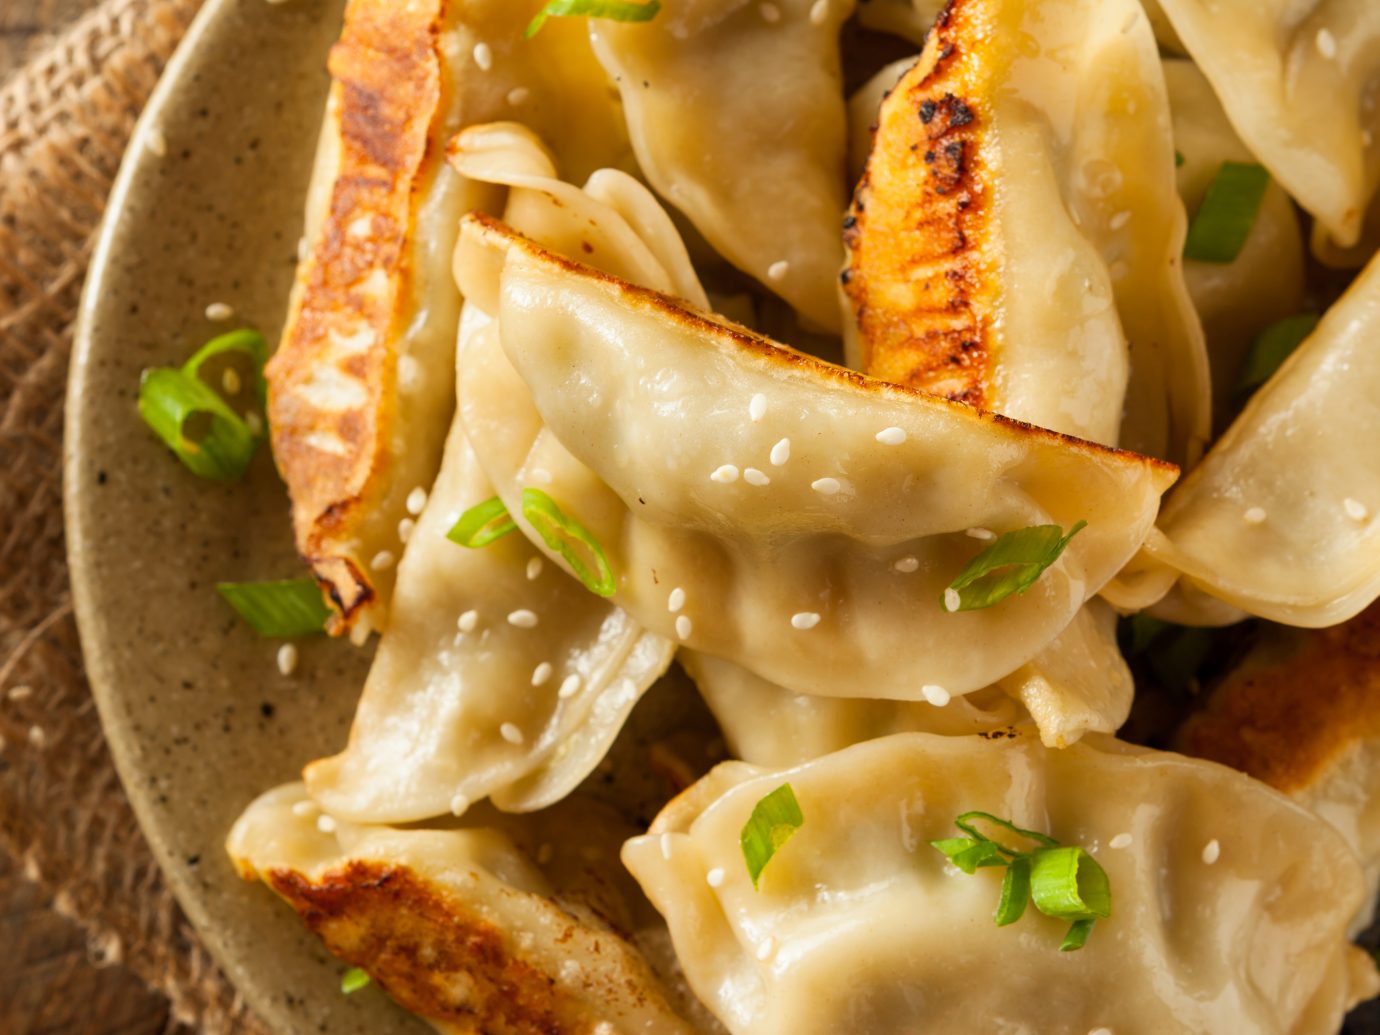 Homemade Asian Pork Potstickers with Soy Sauce